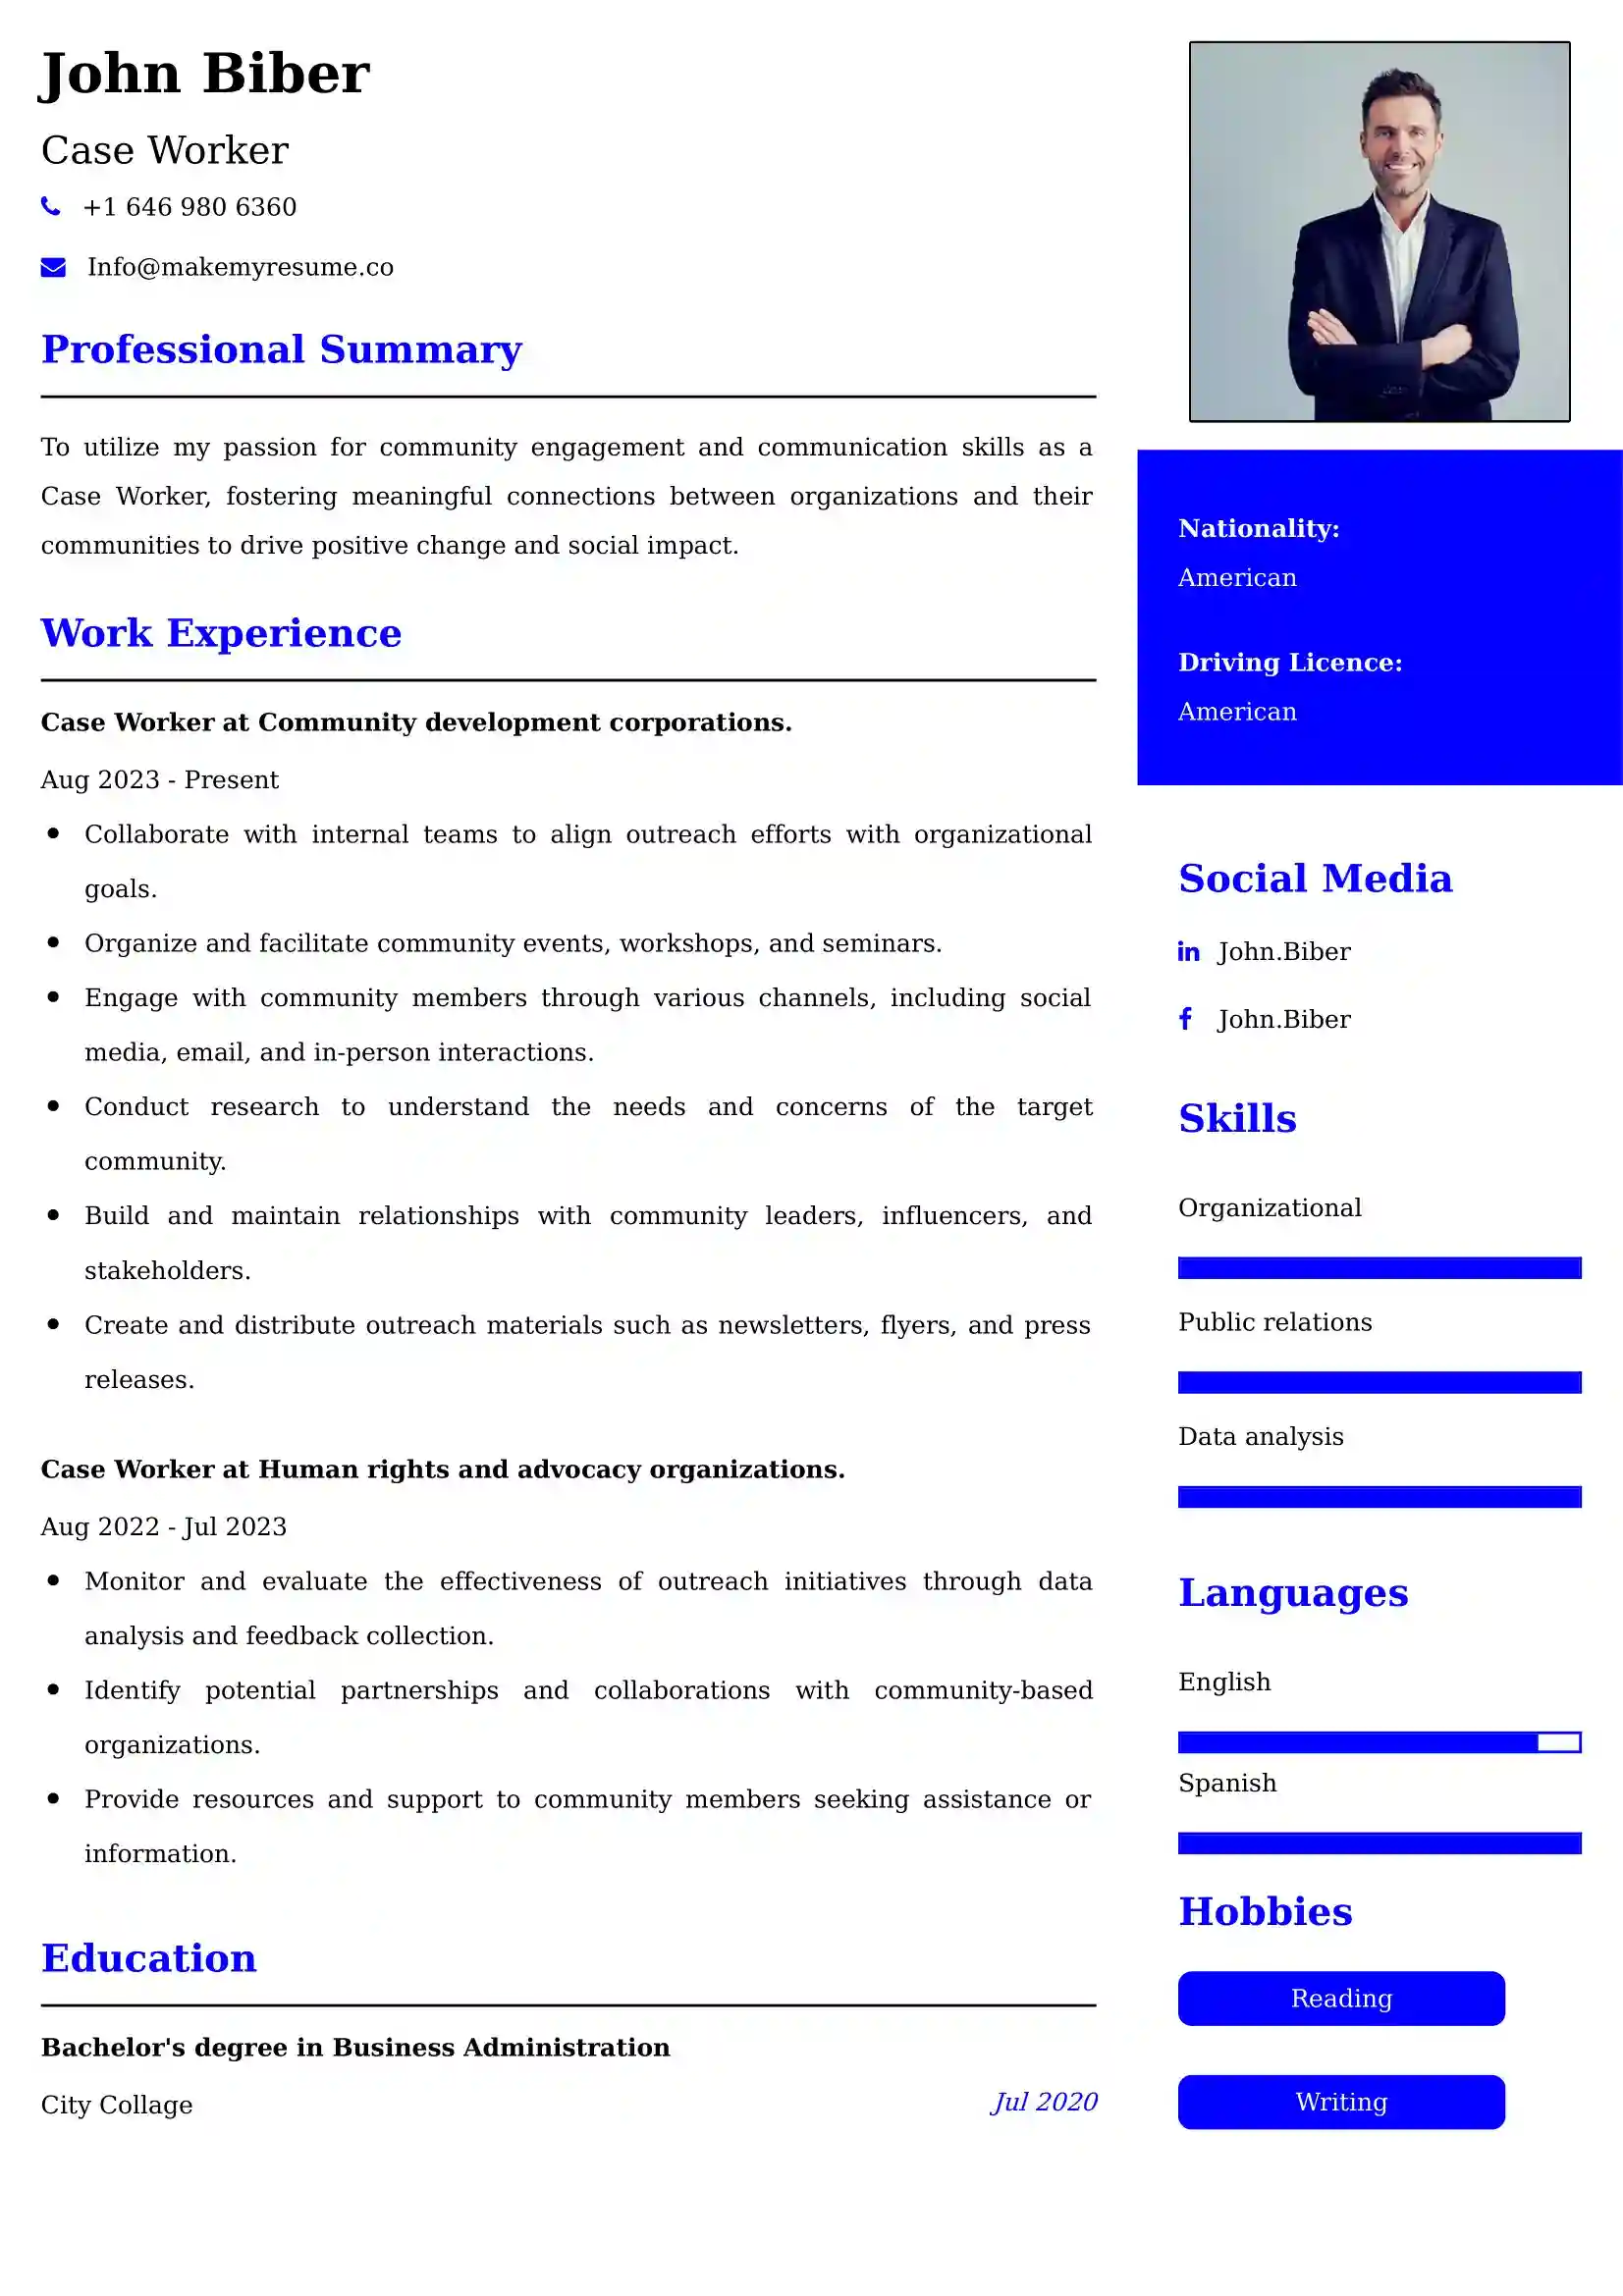 Best Case Worker Resume Examples for UK